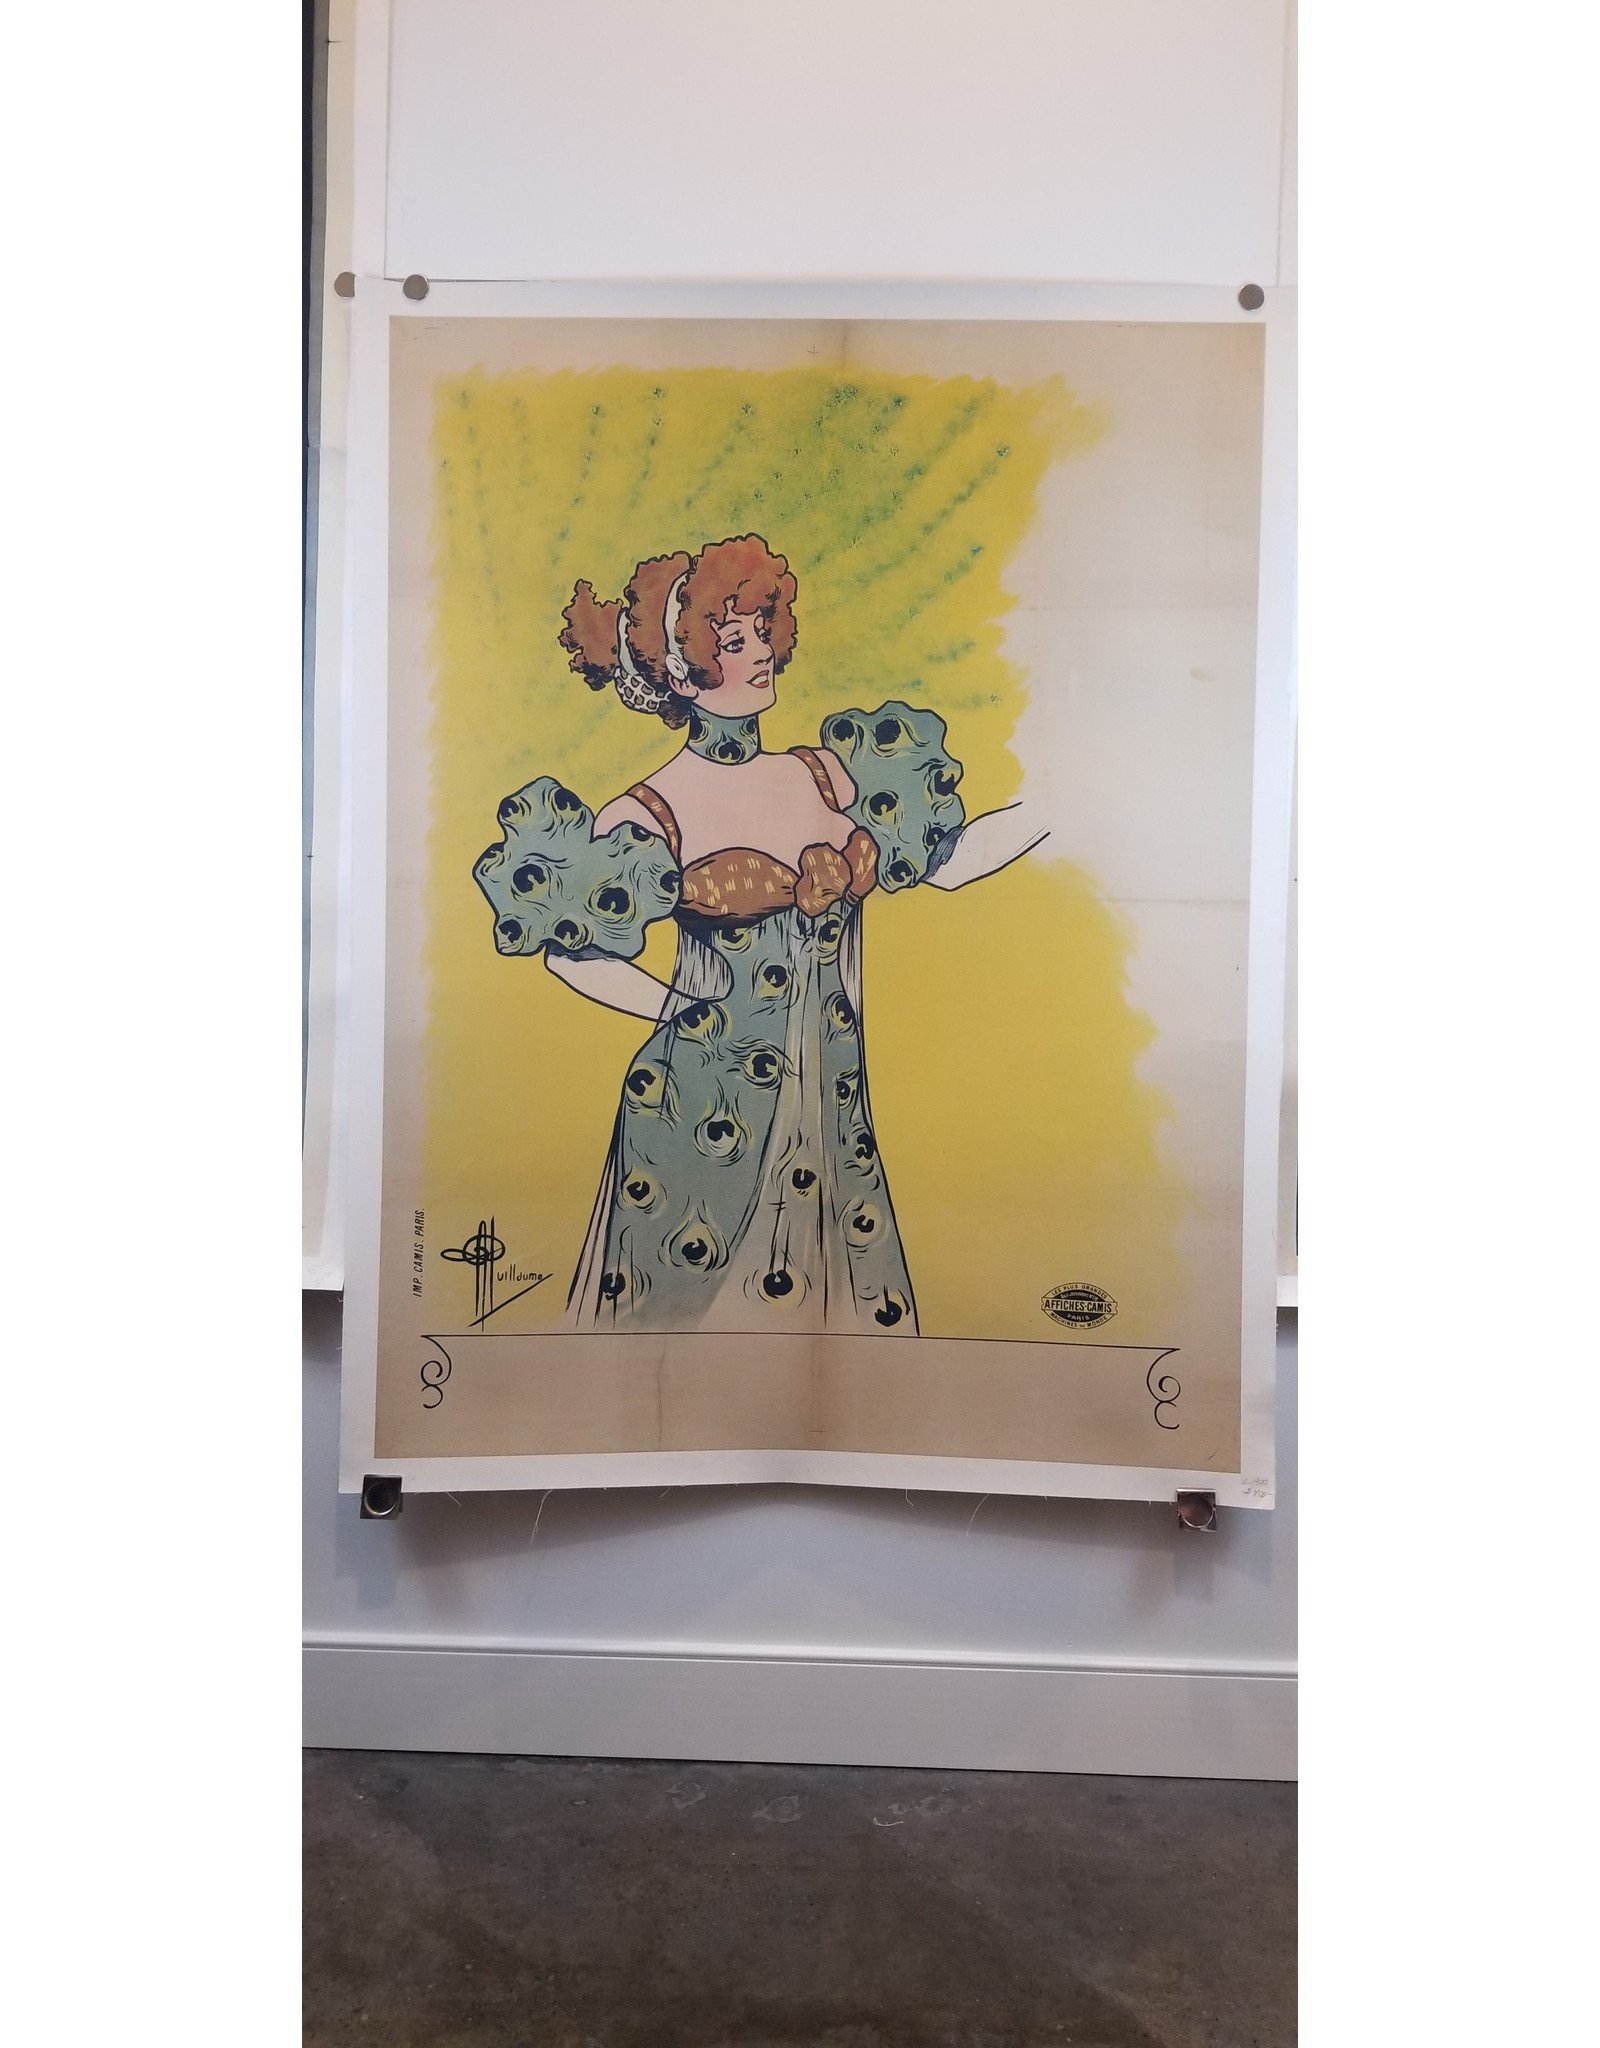 SPV Woman in Peacock Dress Lithograph Poster